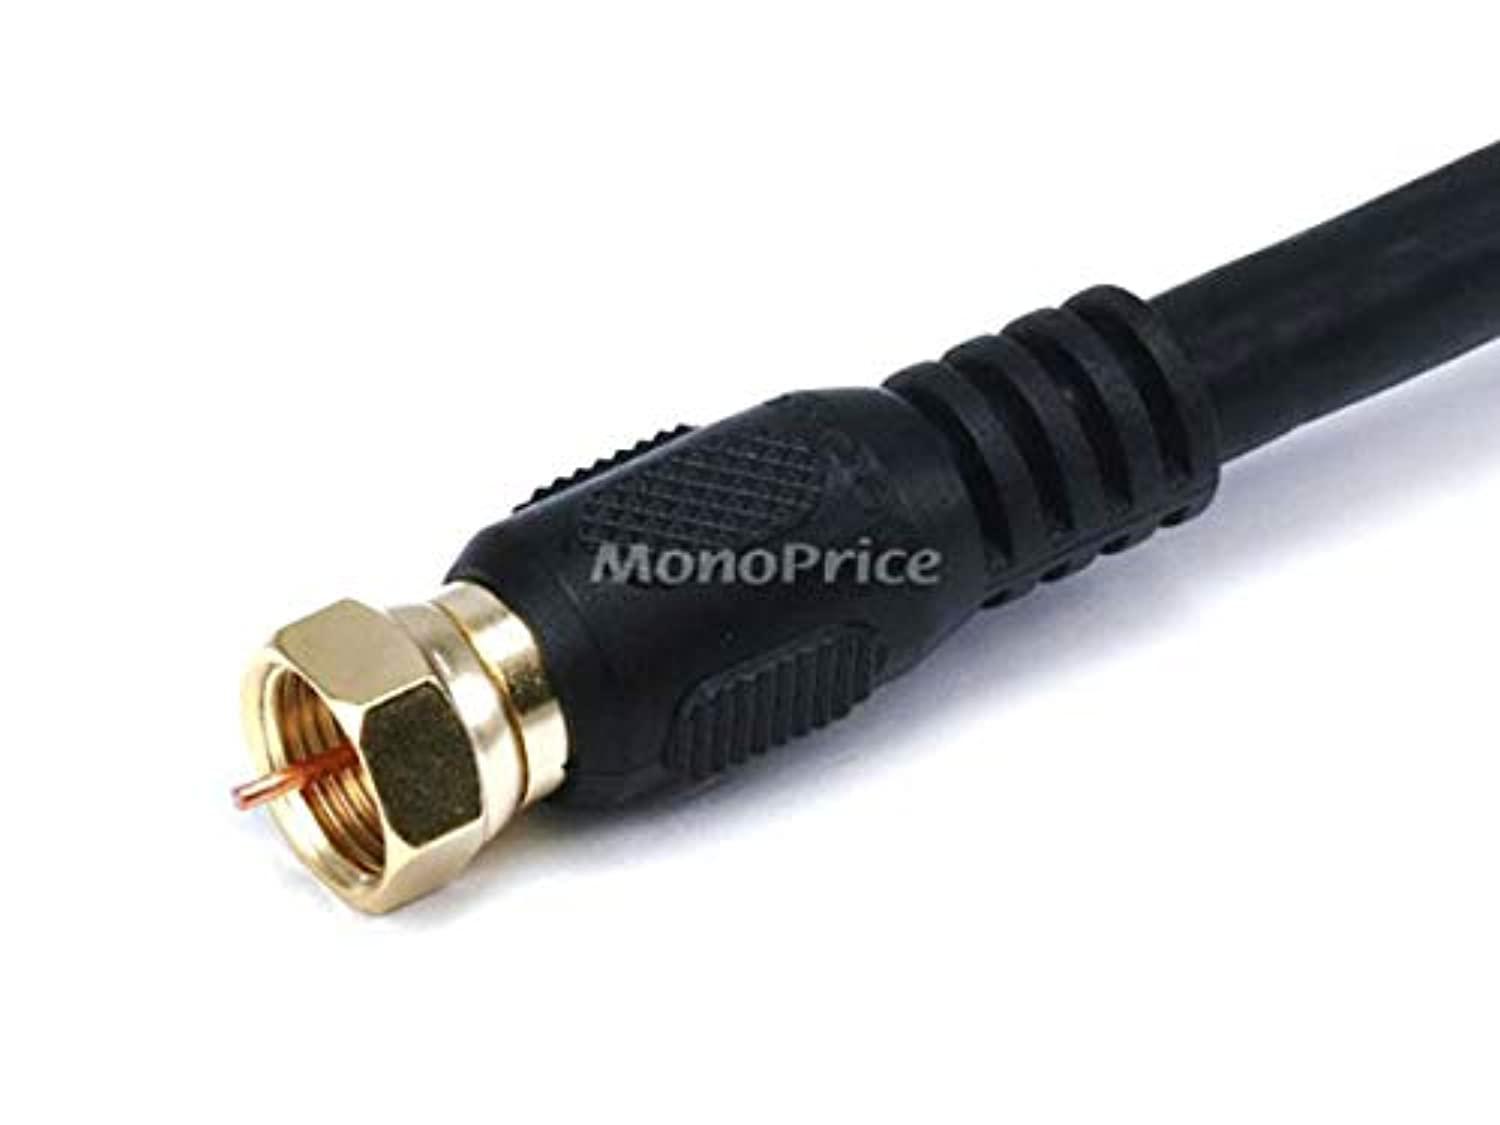 monoprice video cable - 12 feet - black | rg6 quad shield cl2 coaxial cable with f type connector